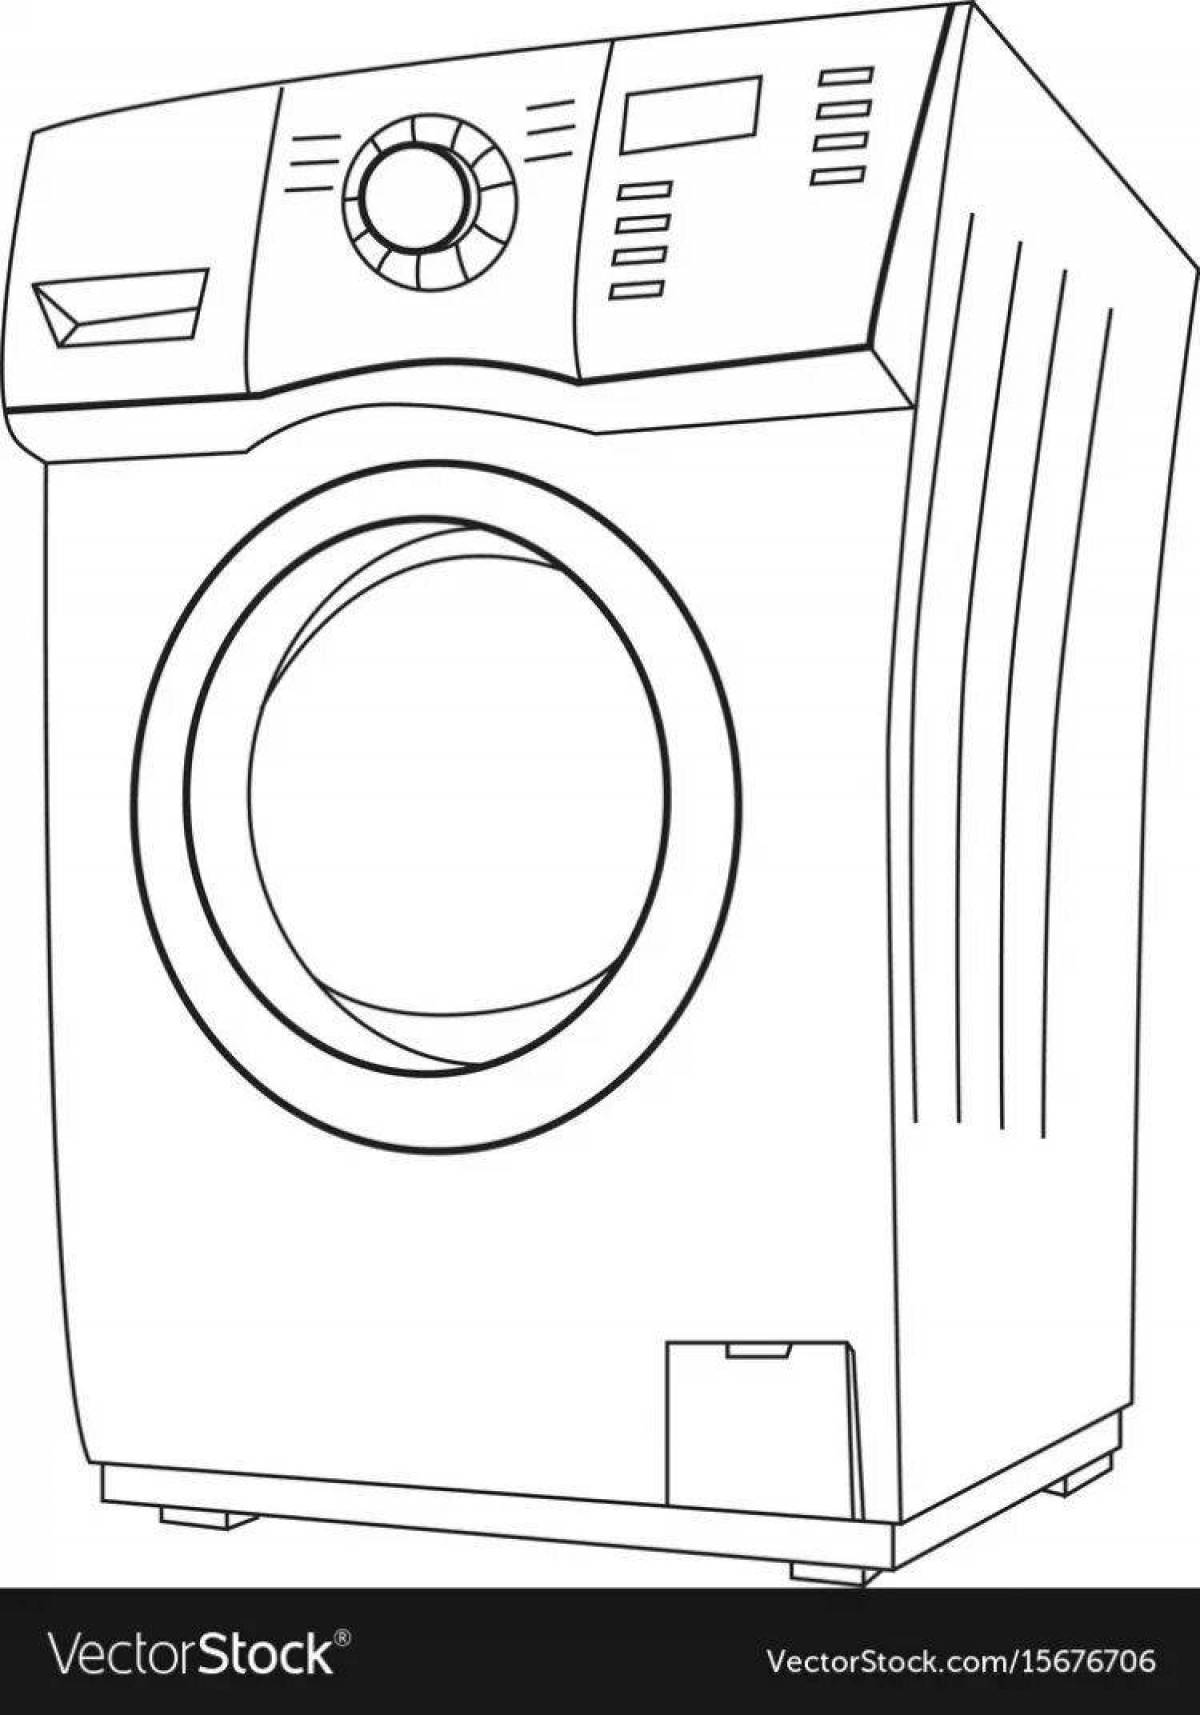 Coloring graceful washer